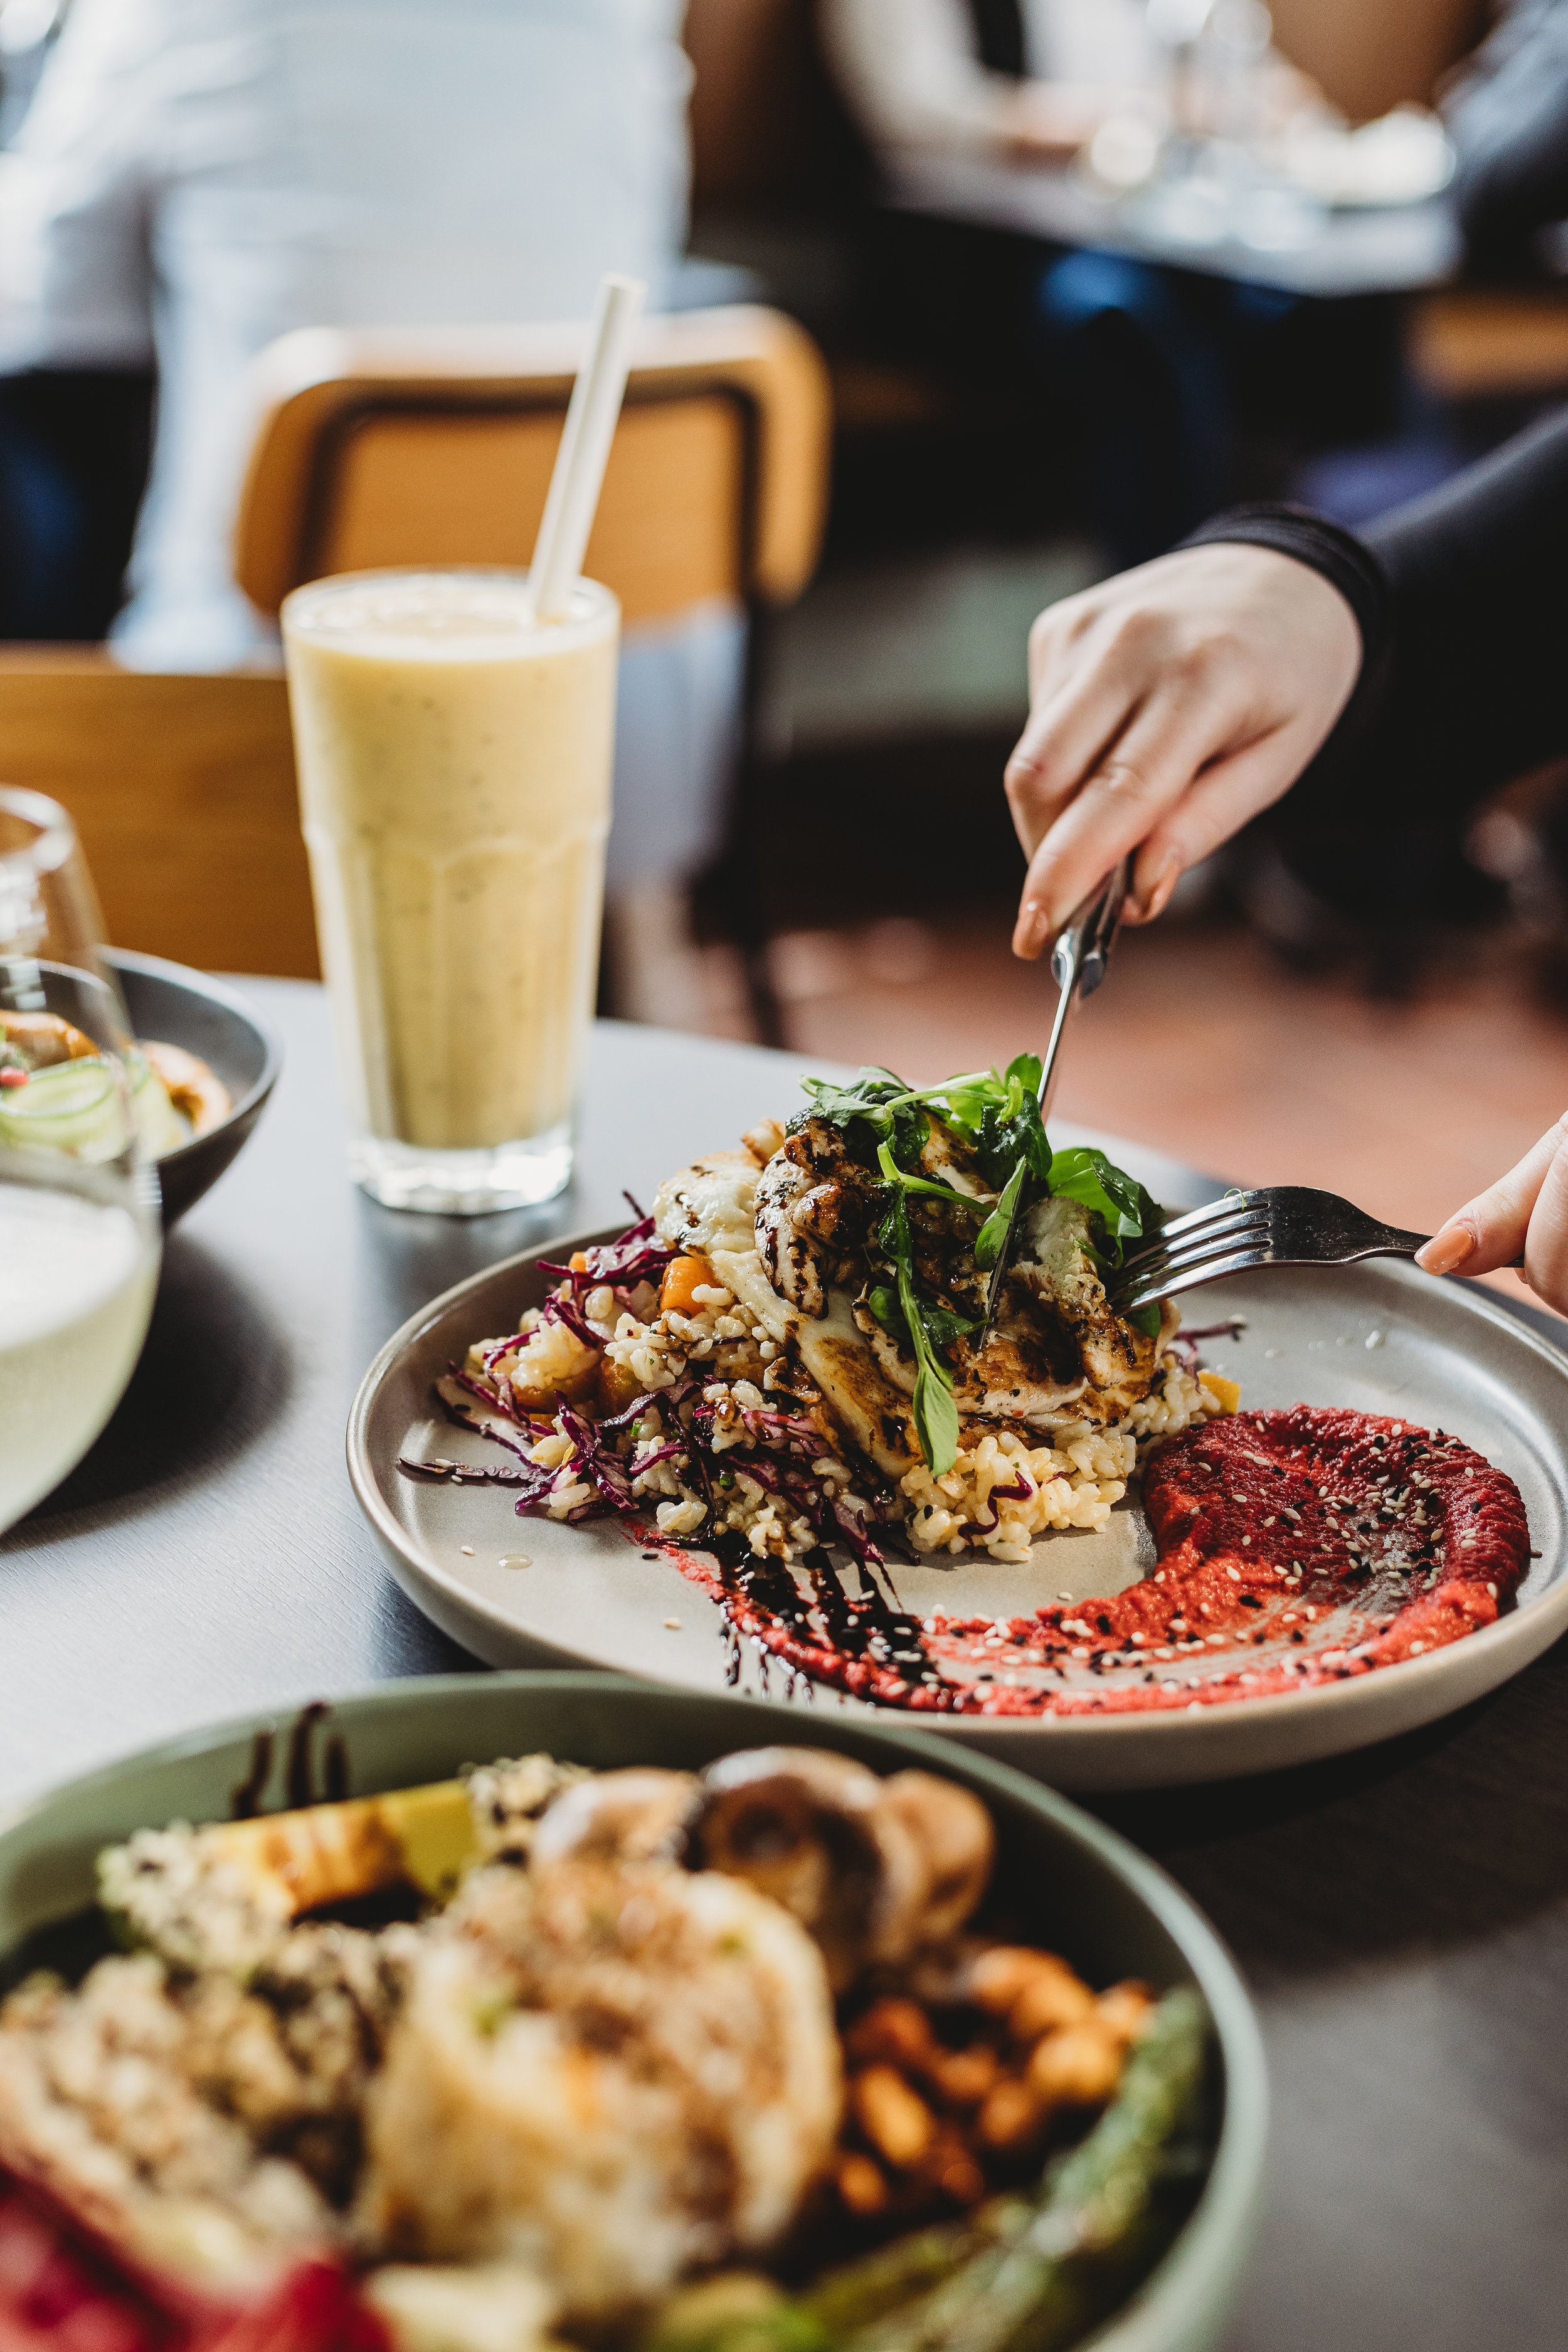 Canberra food photographer - hands cut into vibrant food (Copy)